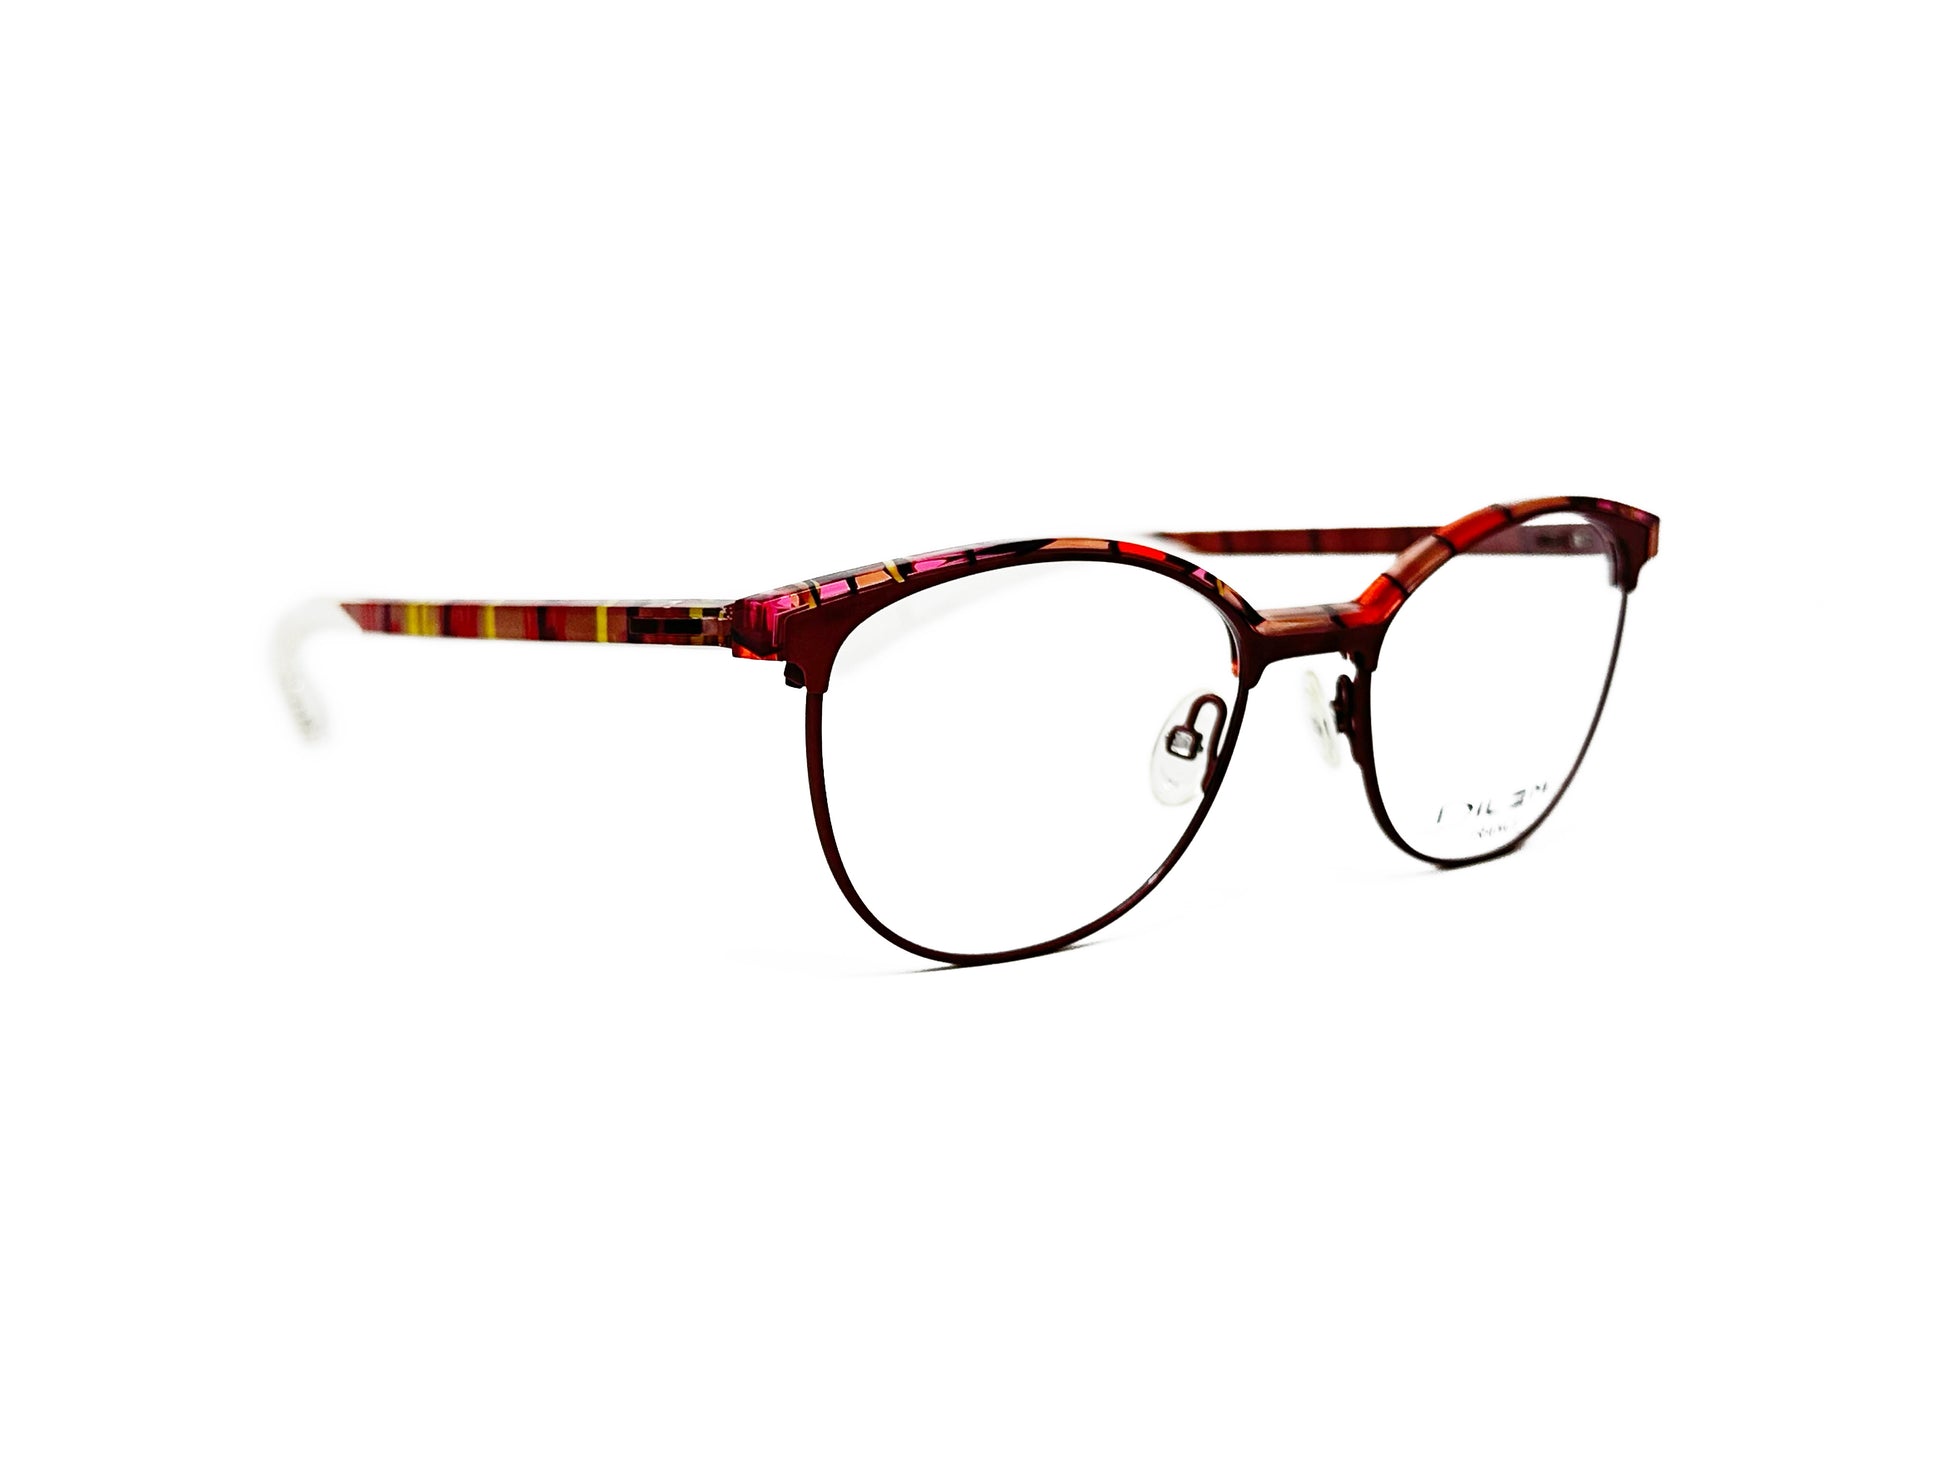 Dilem rounded, metal, optical frame with wing-tips. Model: ZF392. Color: 2NA03 - Multi-color red. Side view.